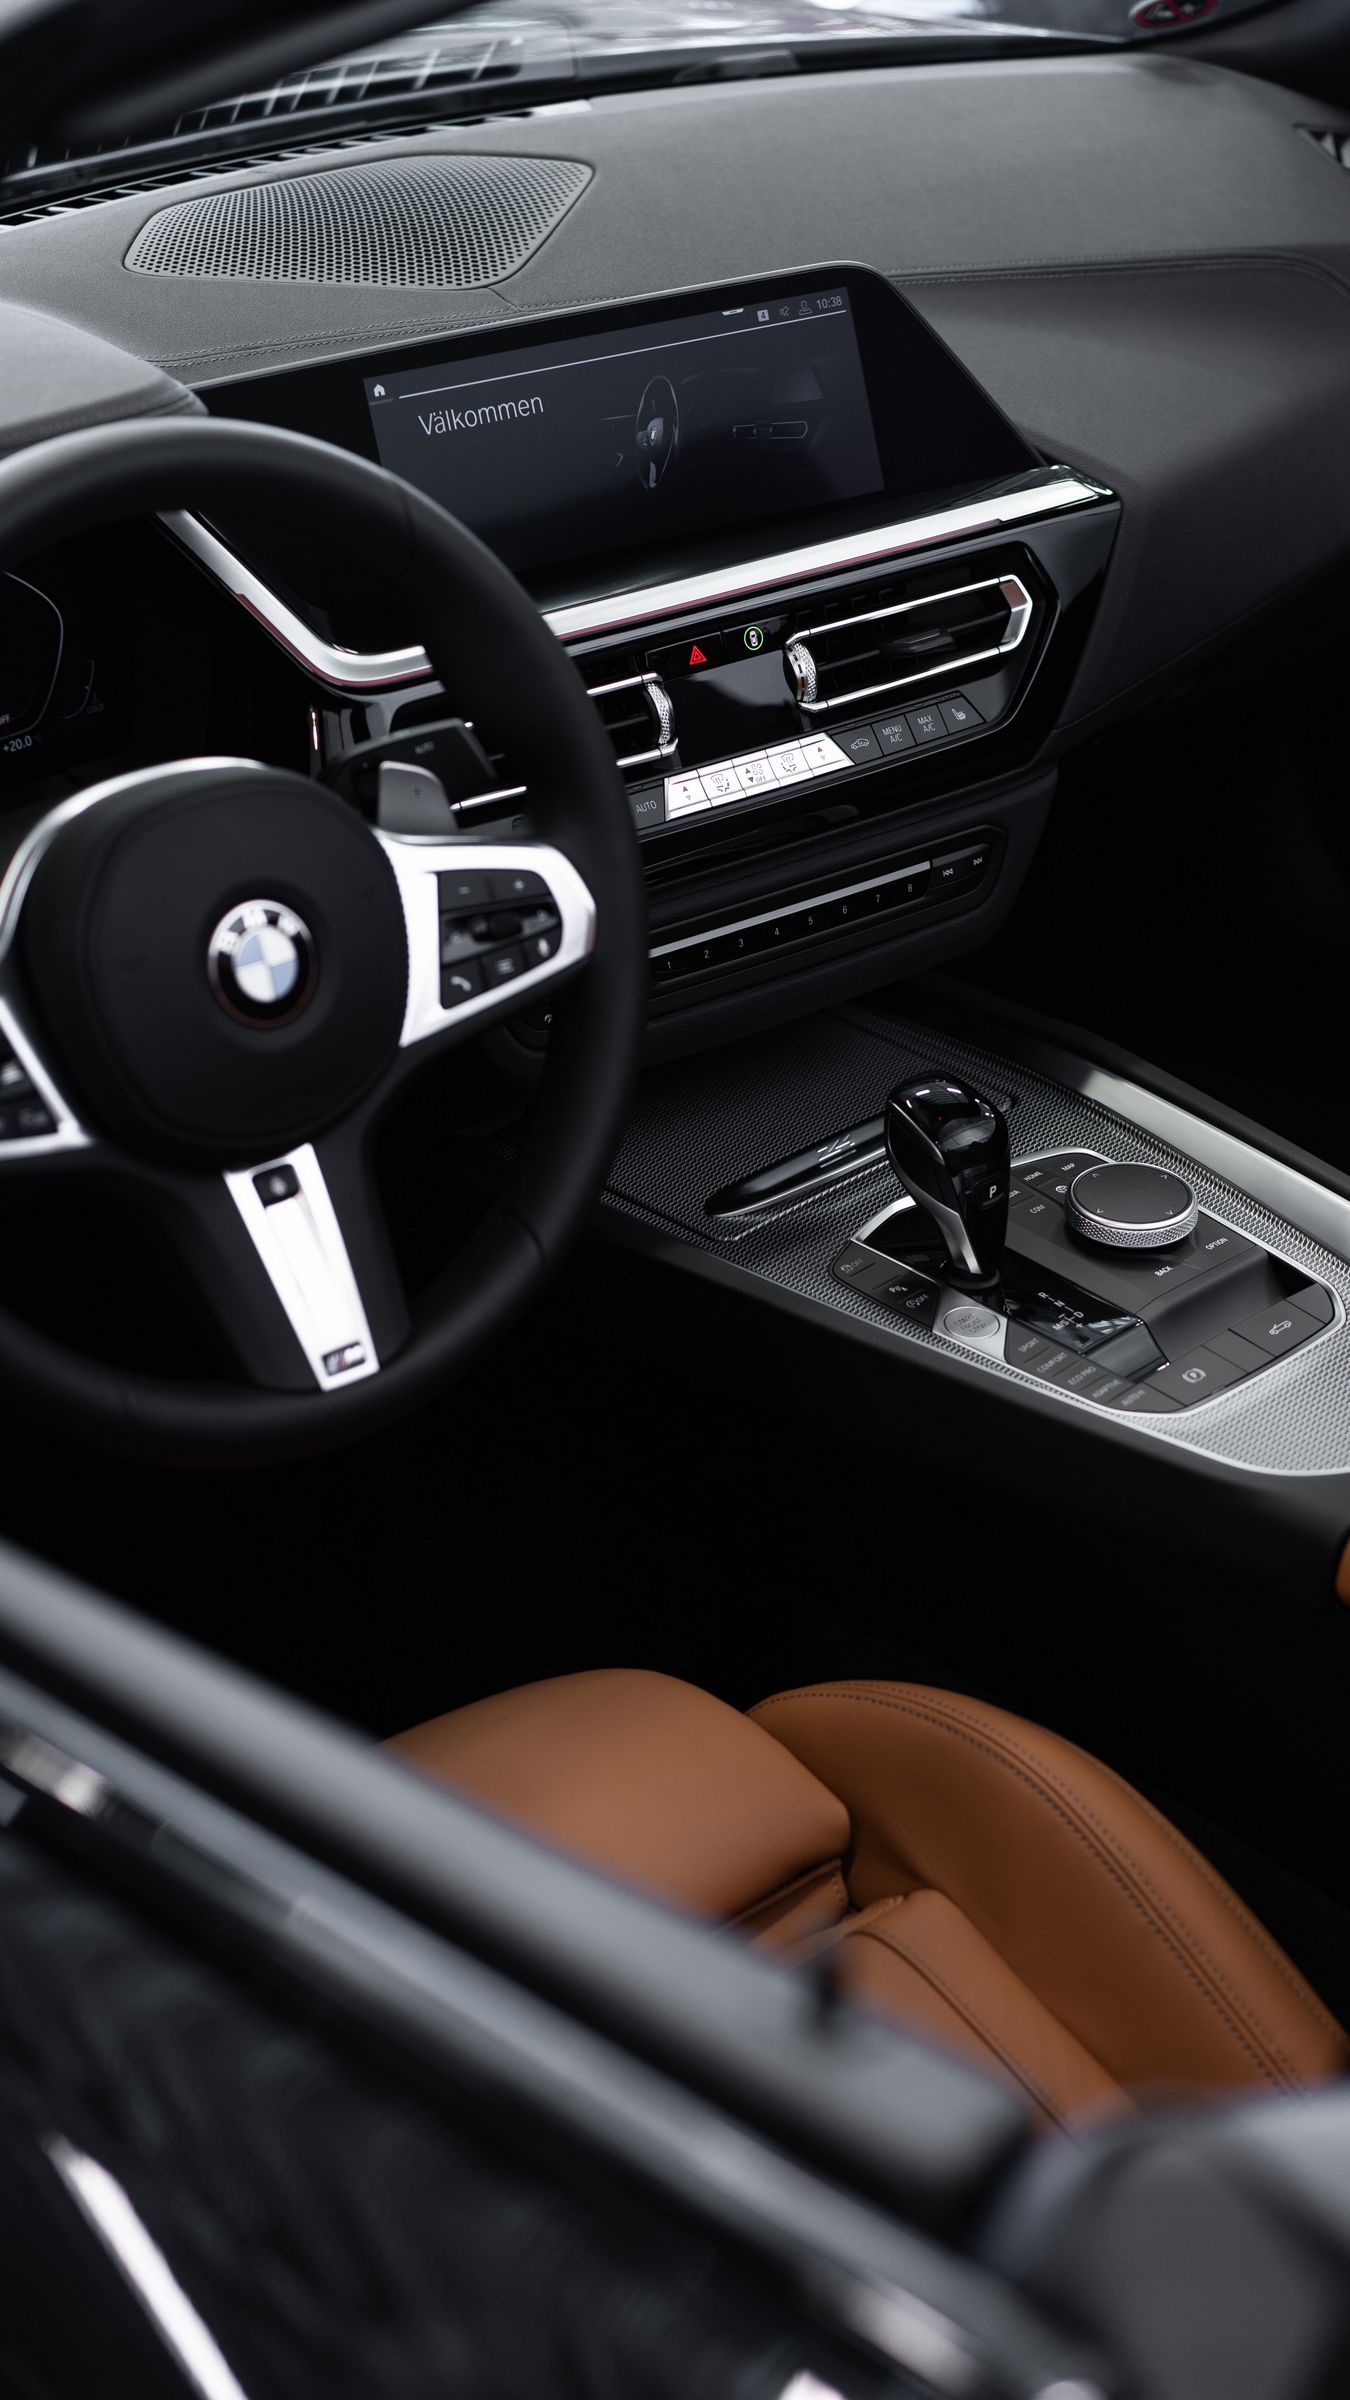 Download wallpaper 1350x2400 bmw, interior, car, steering wheel iphone 8+/7+/6s+/for parallax HD background